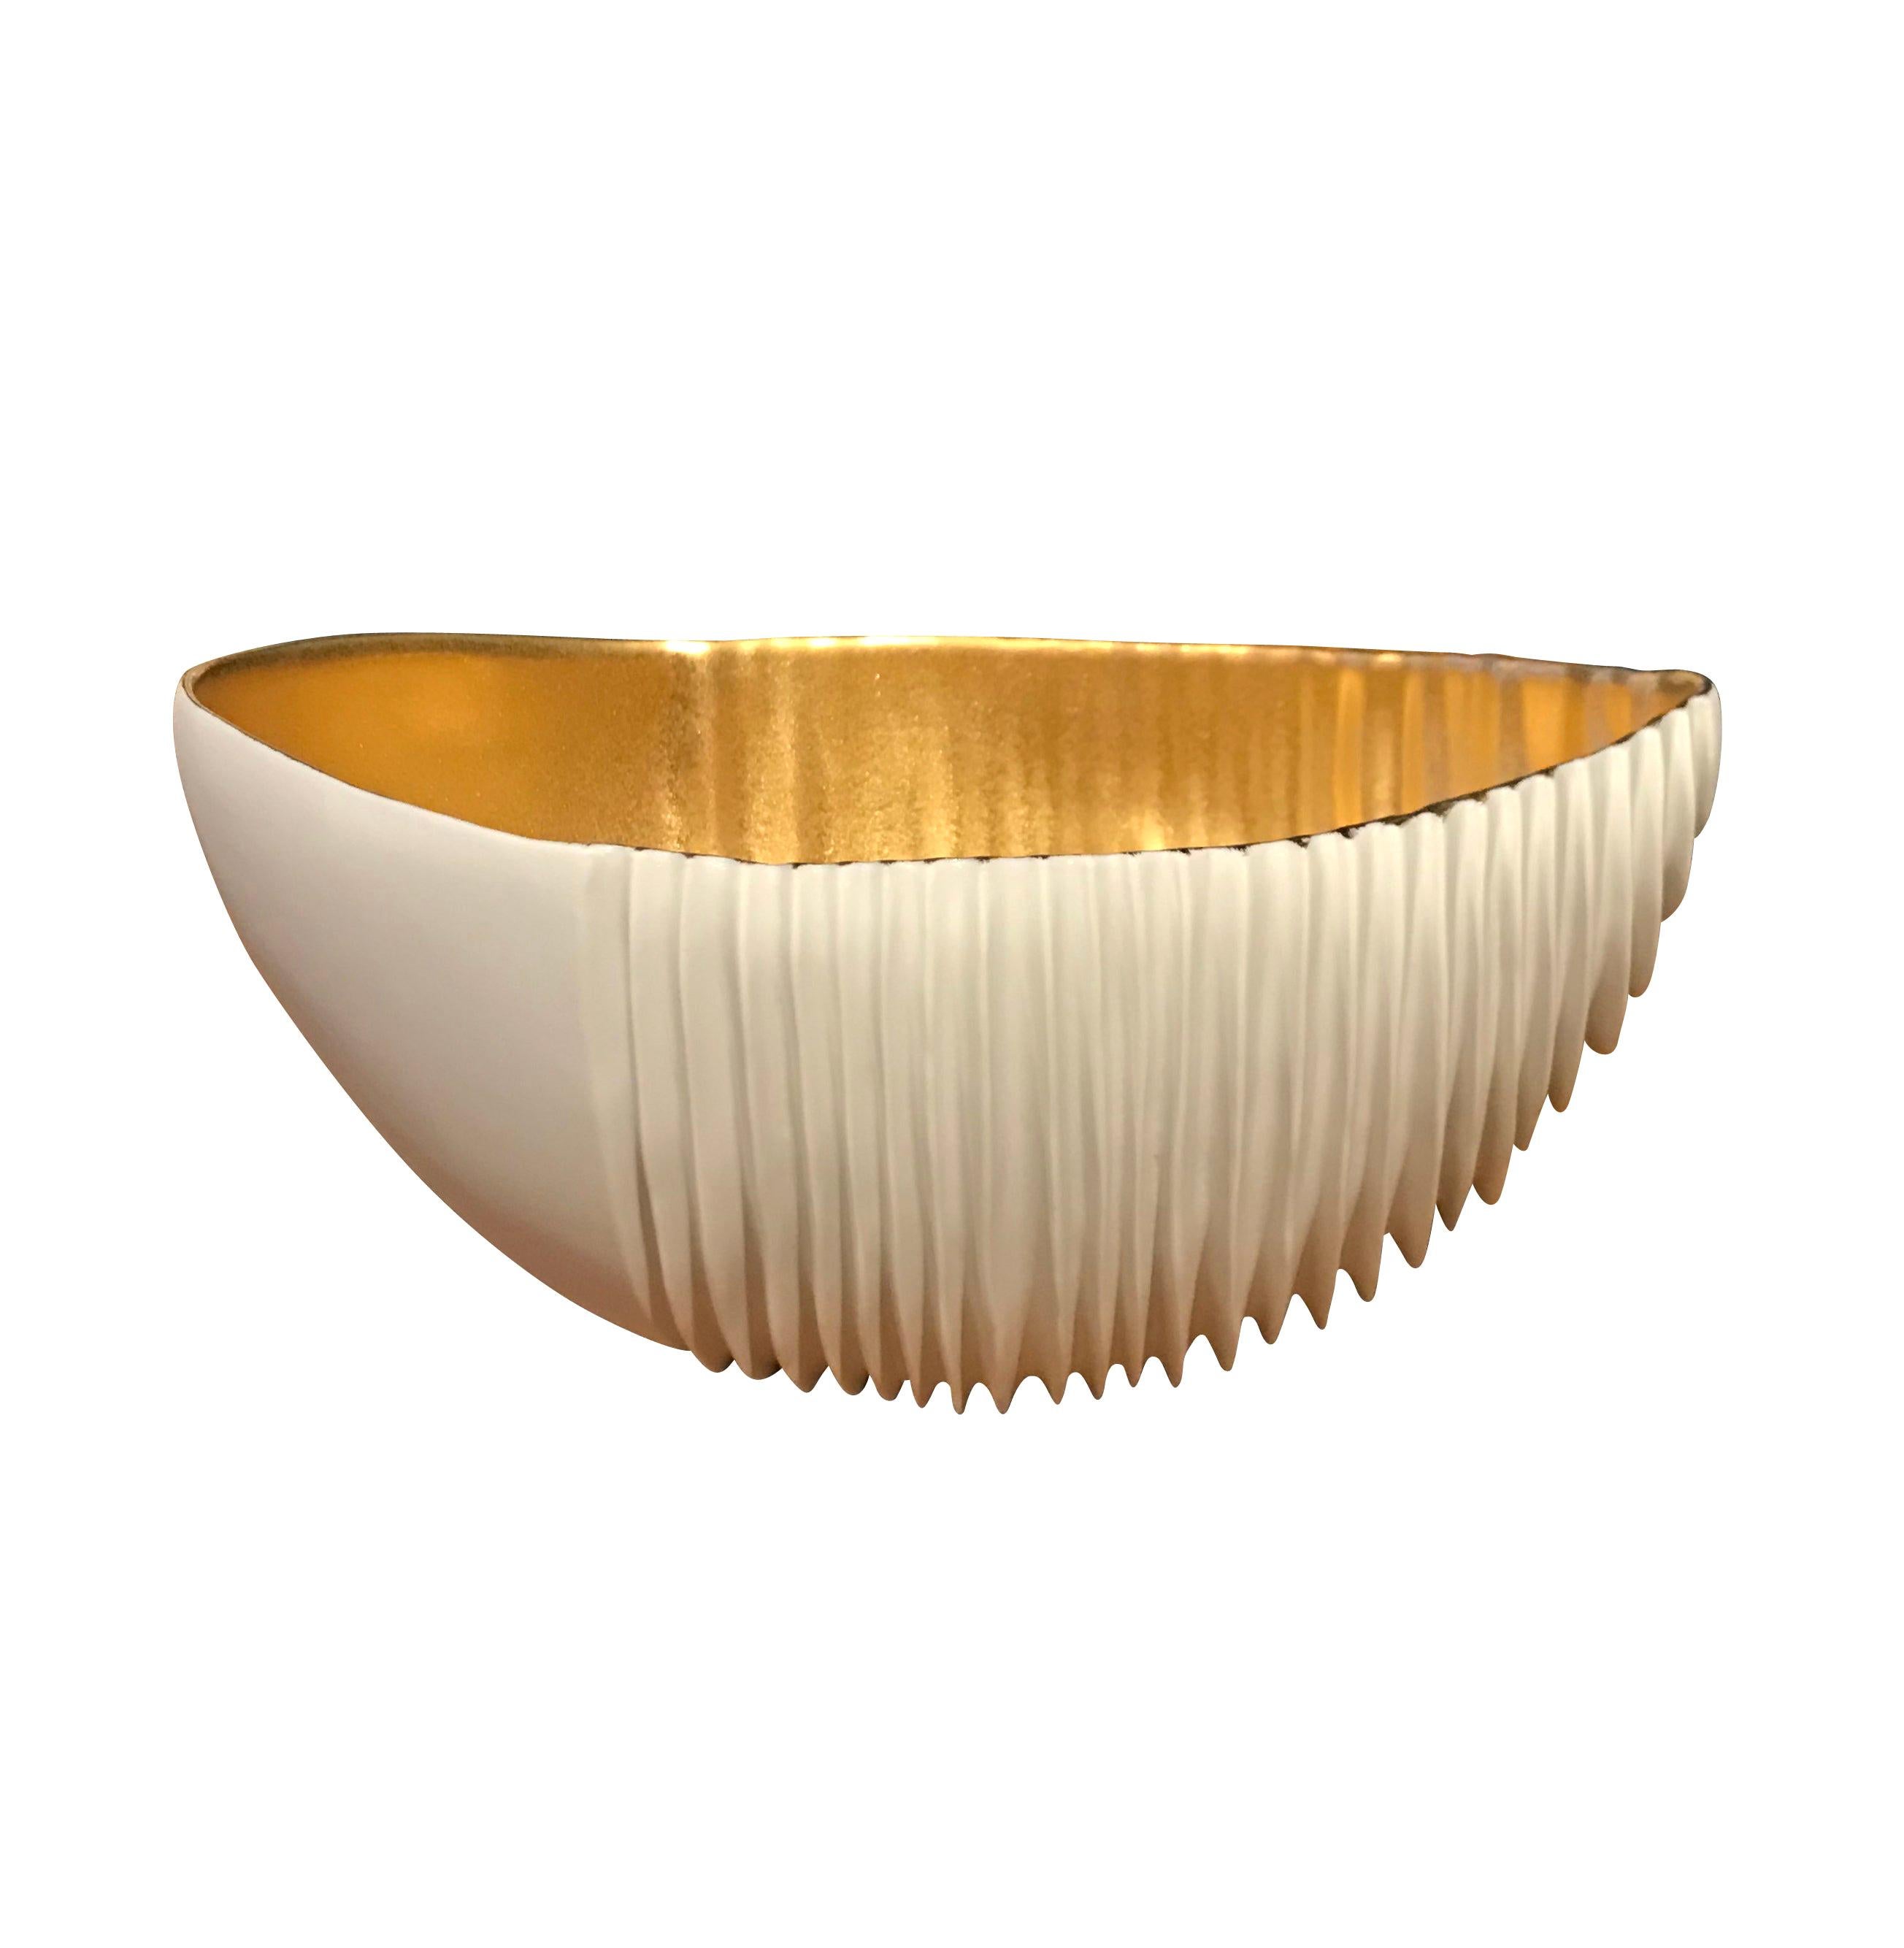 White Porcelain Bowl with Gold Leaf Inside, Italy, Contemporary